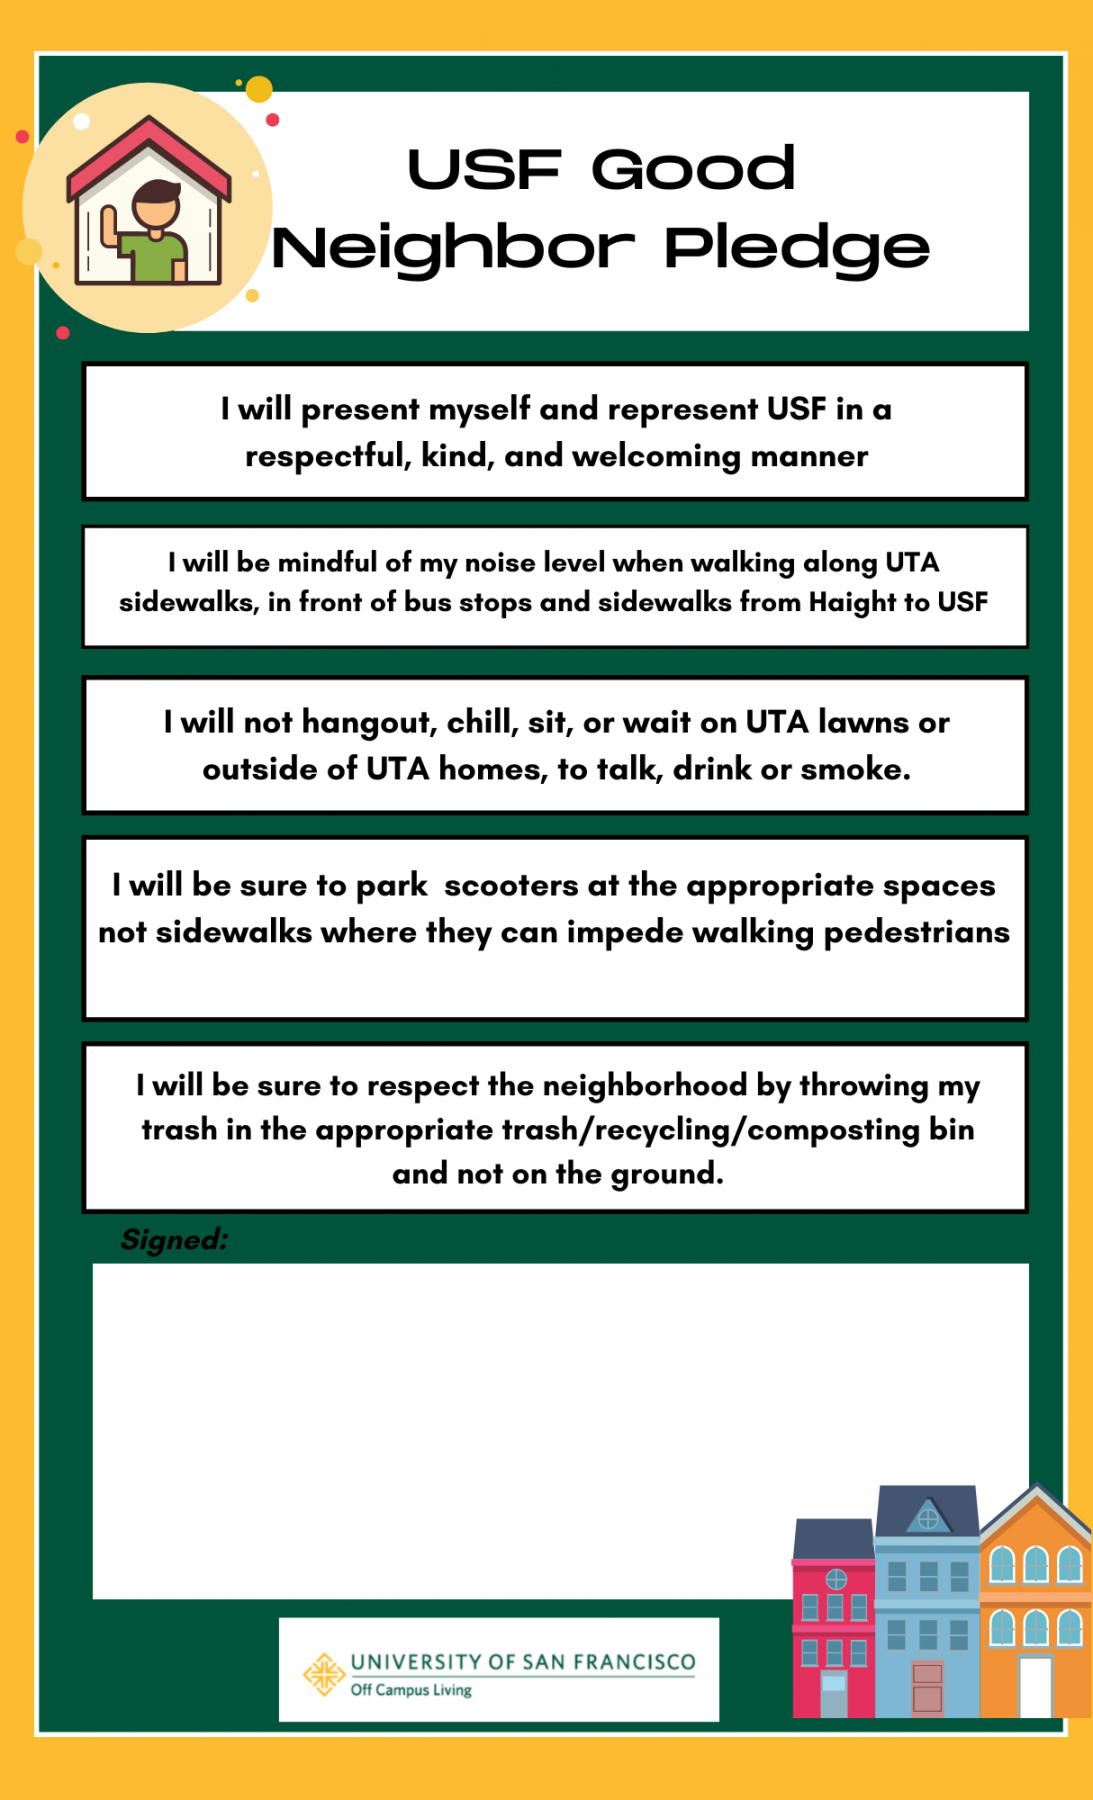 Copy of USF Good Neighbor Pledge that students signed